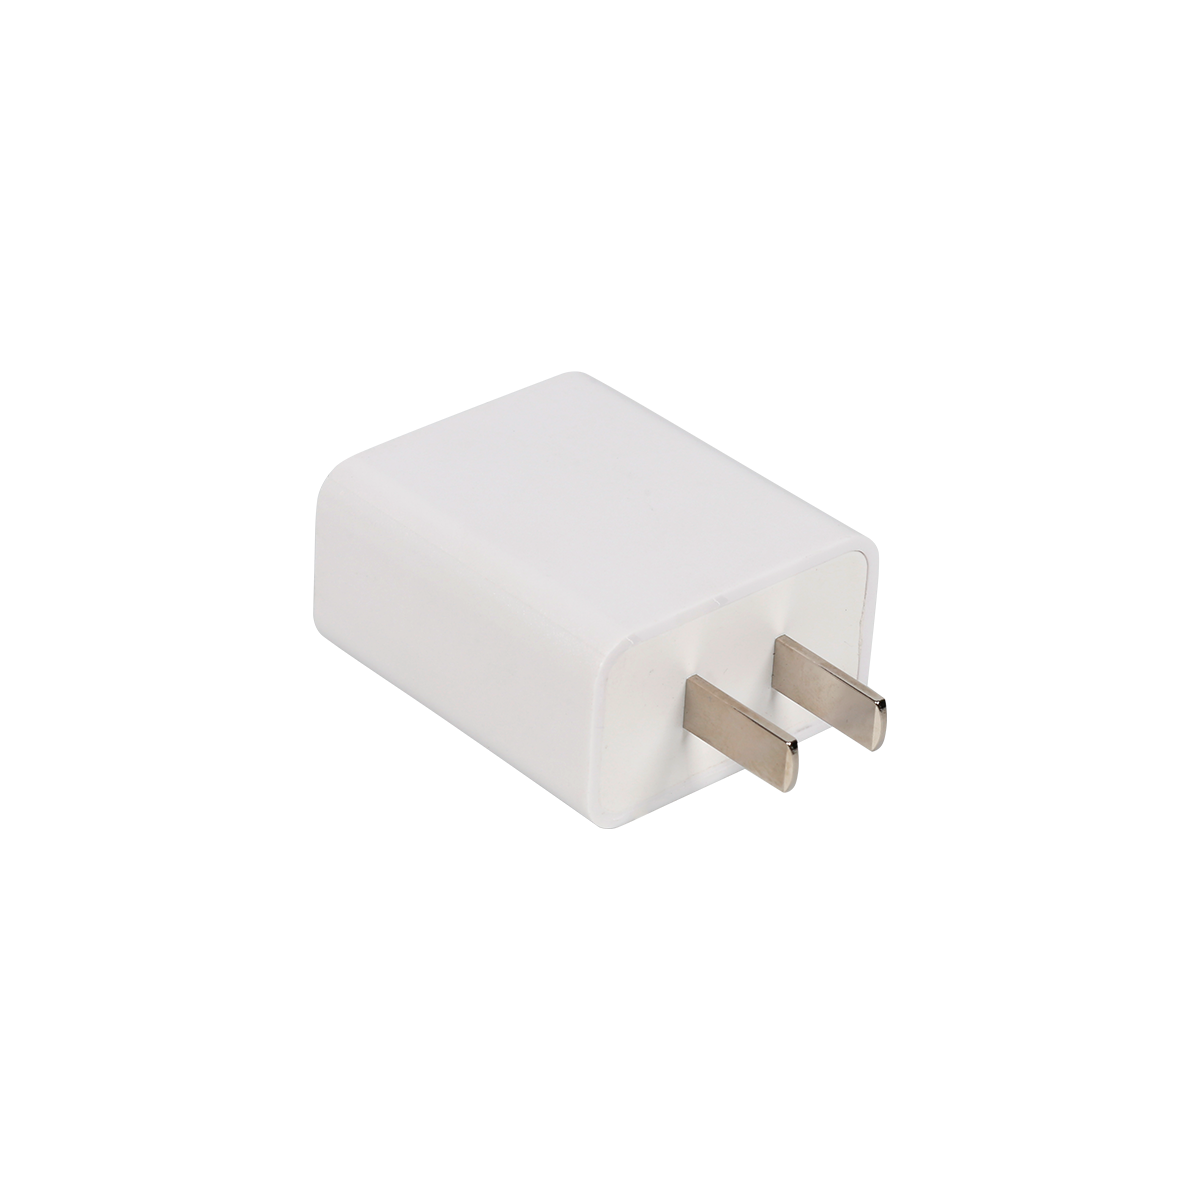 CH plug 10W  USB phone wall charger for iPhone chargers 